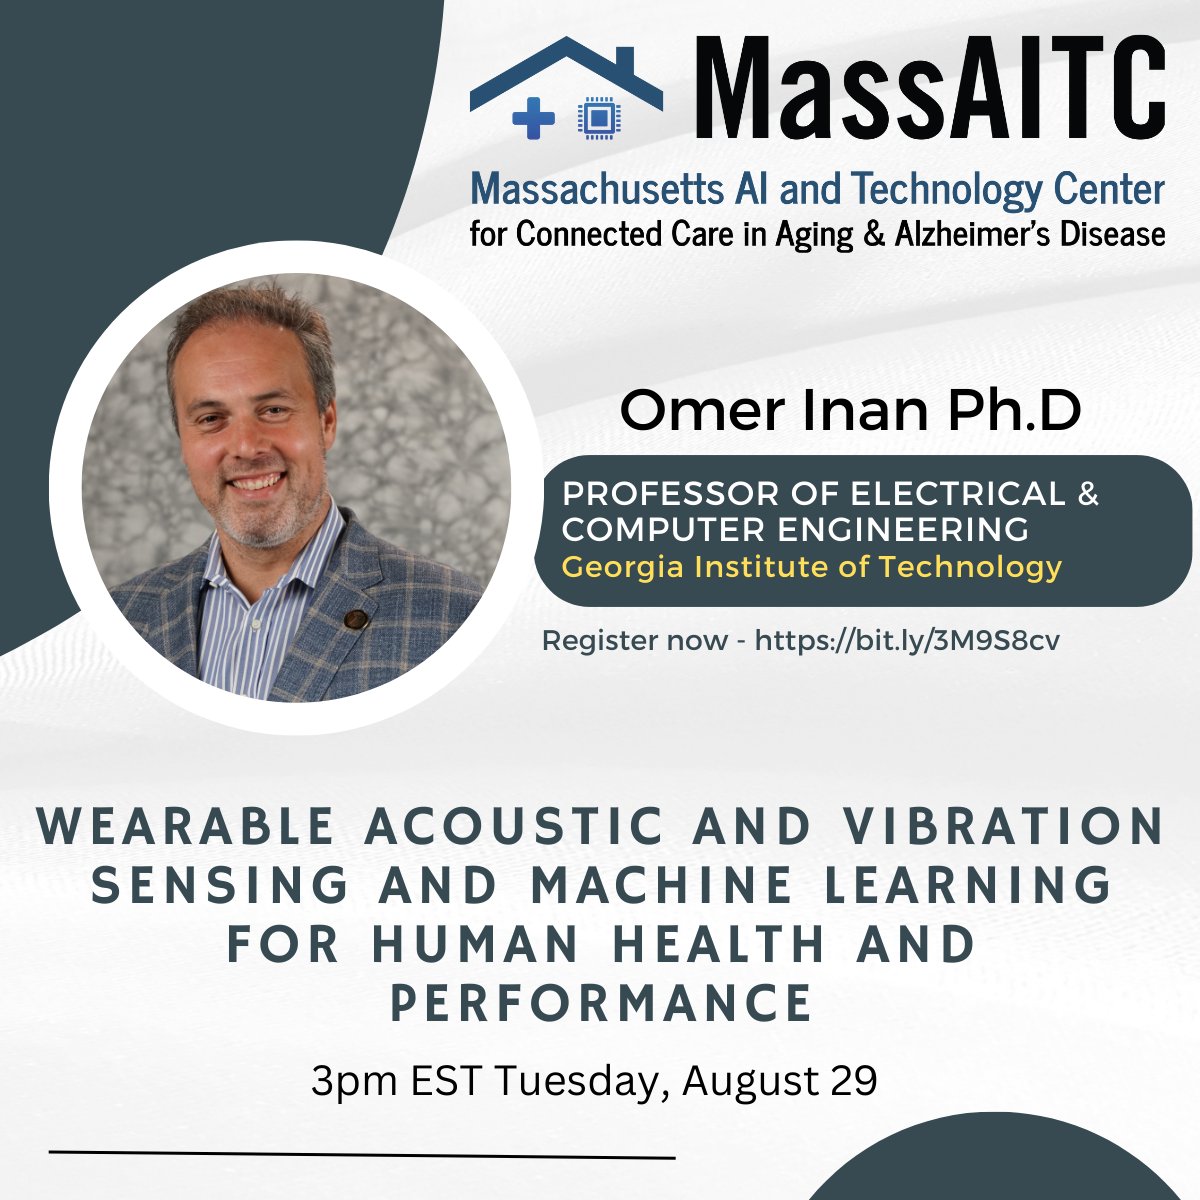 Join Omer Inan's 8/29 talk on advances in #DigitalHealth! Topics: cardiogenic  vibes and joint acoustics, decoding heart rhythms for BP insights, heart  failure tracking, and musculoskeletal health through joint acoustics. @manningcics #agetech #niafunded tinyurl.com/yzbs3khv